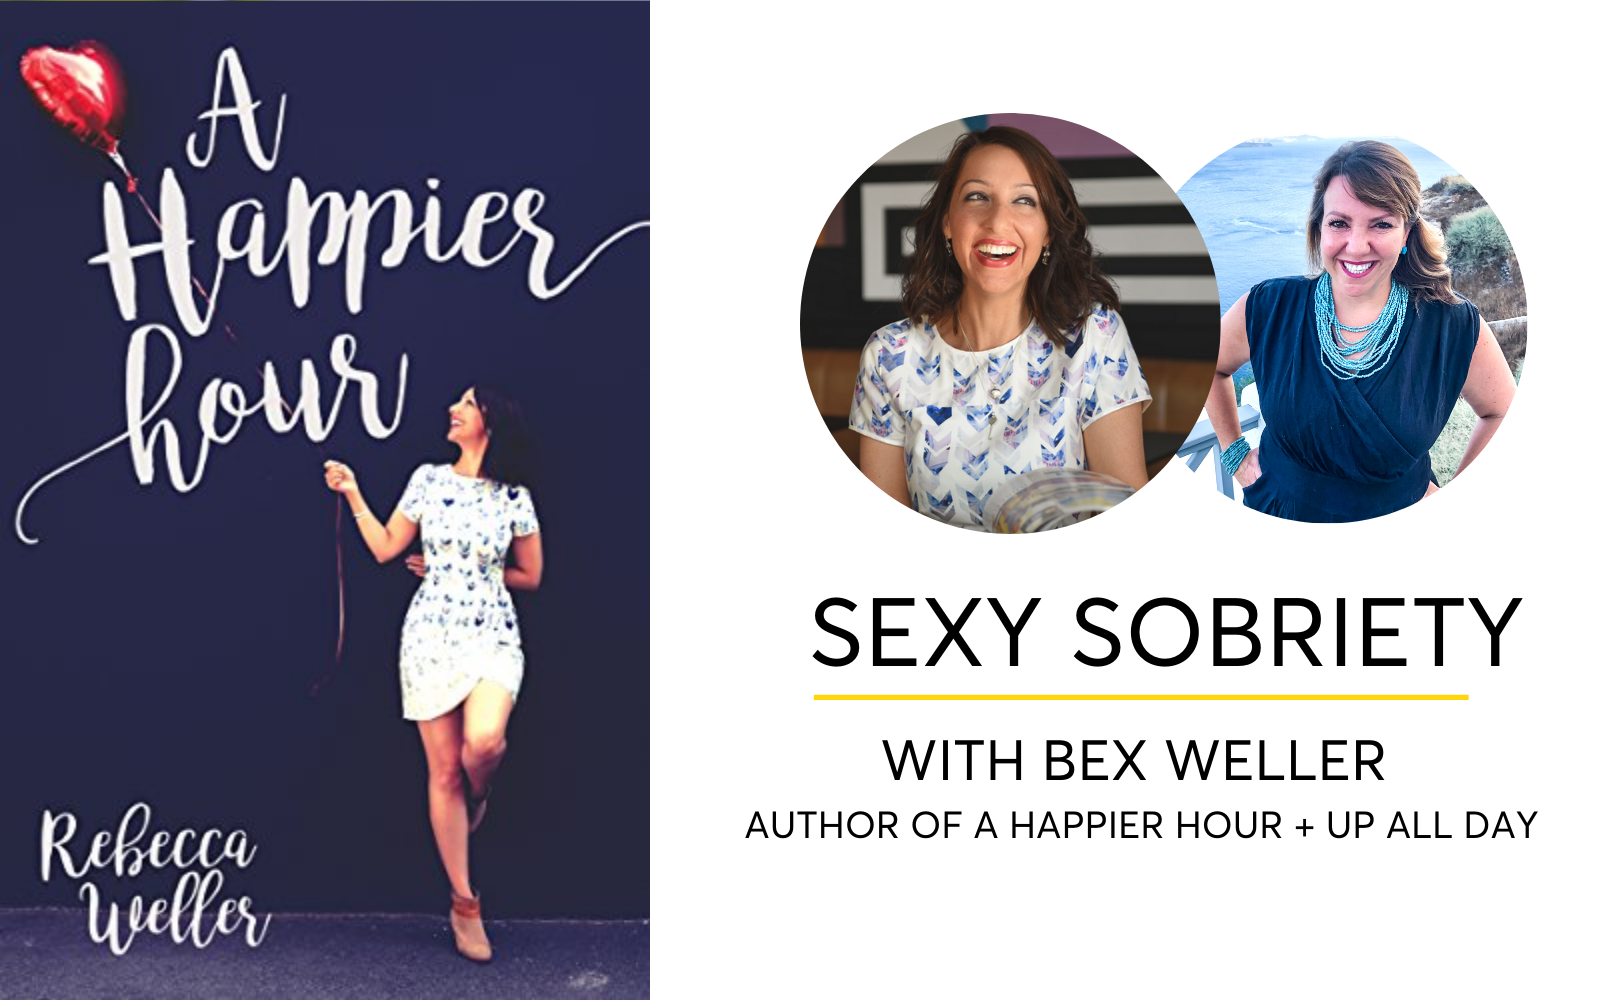 Sexy Sobriety with Bex Weller